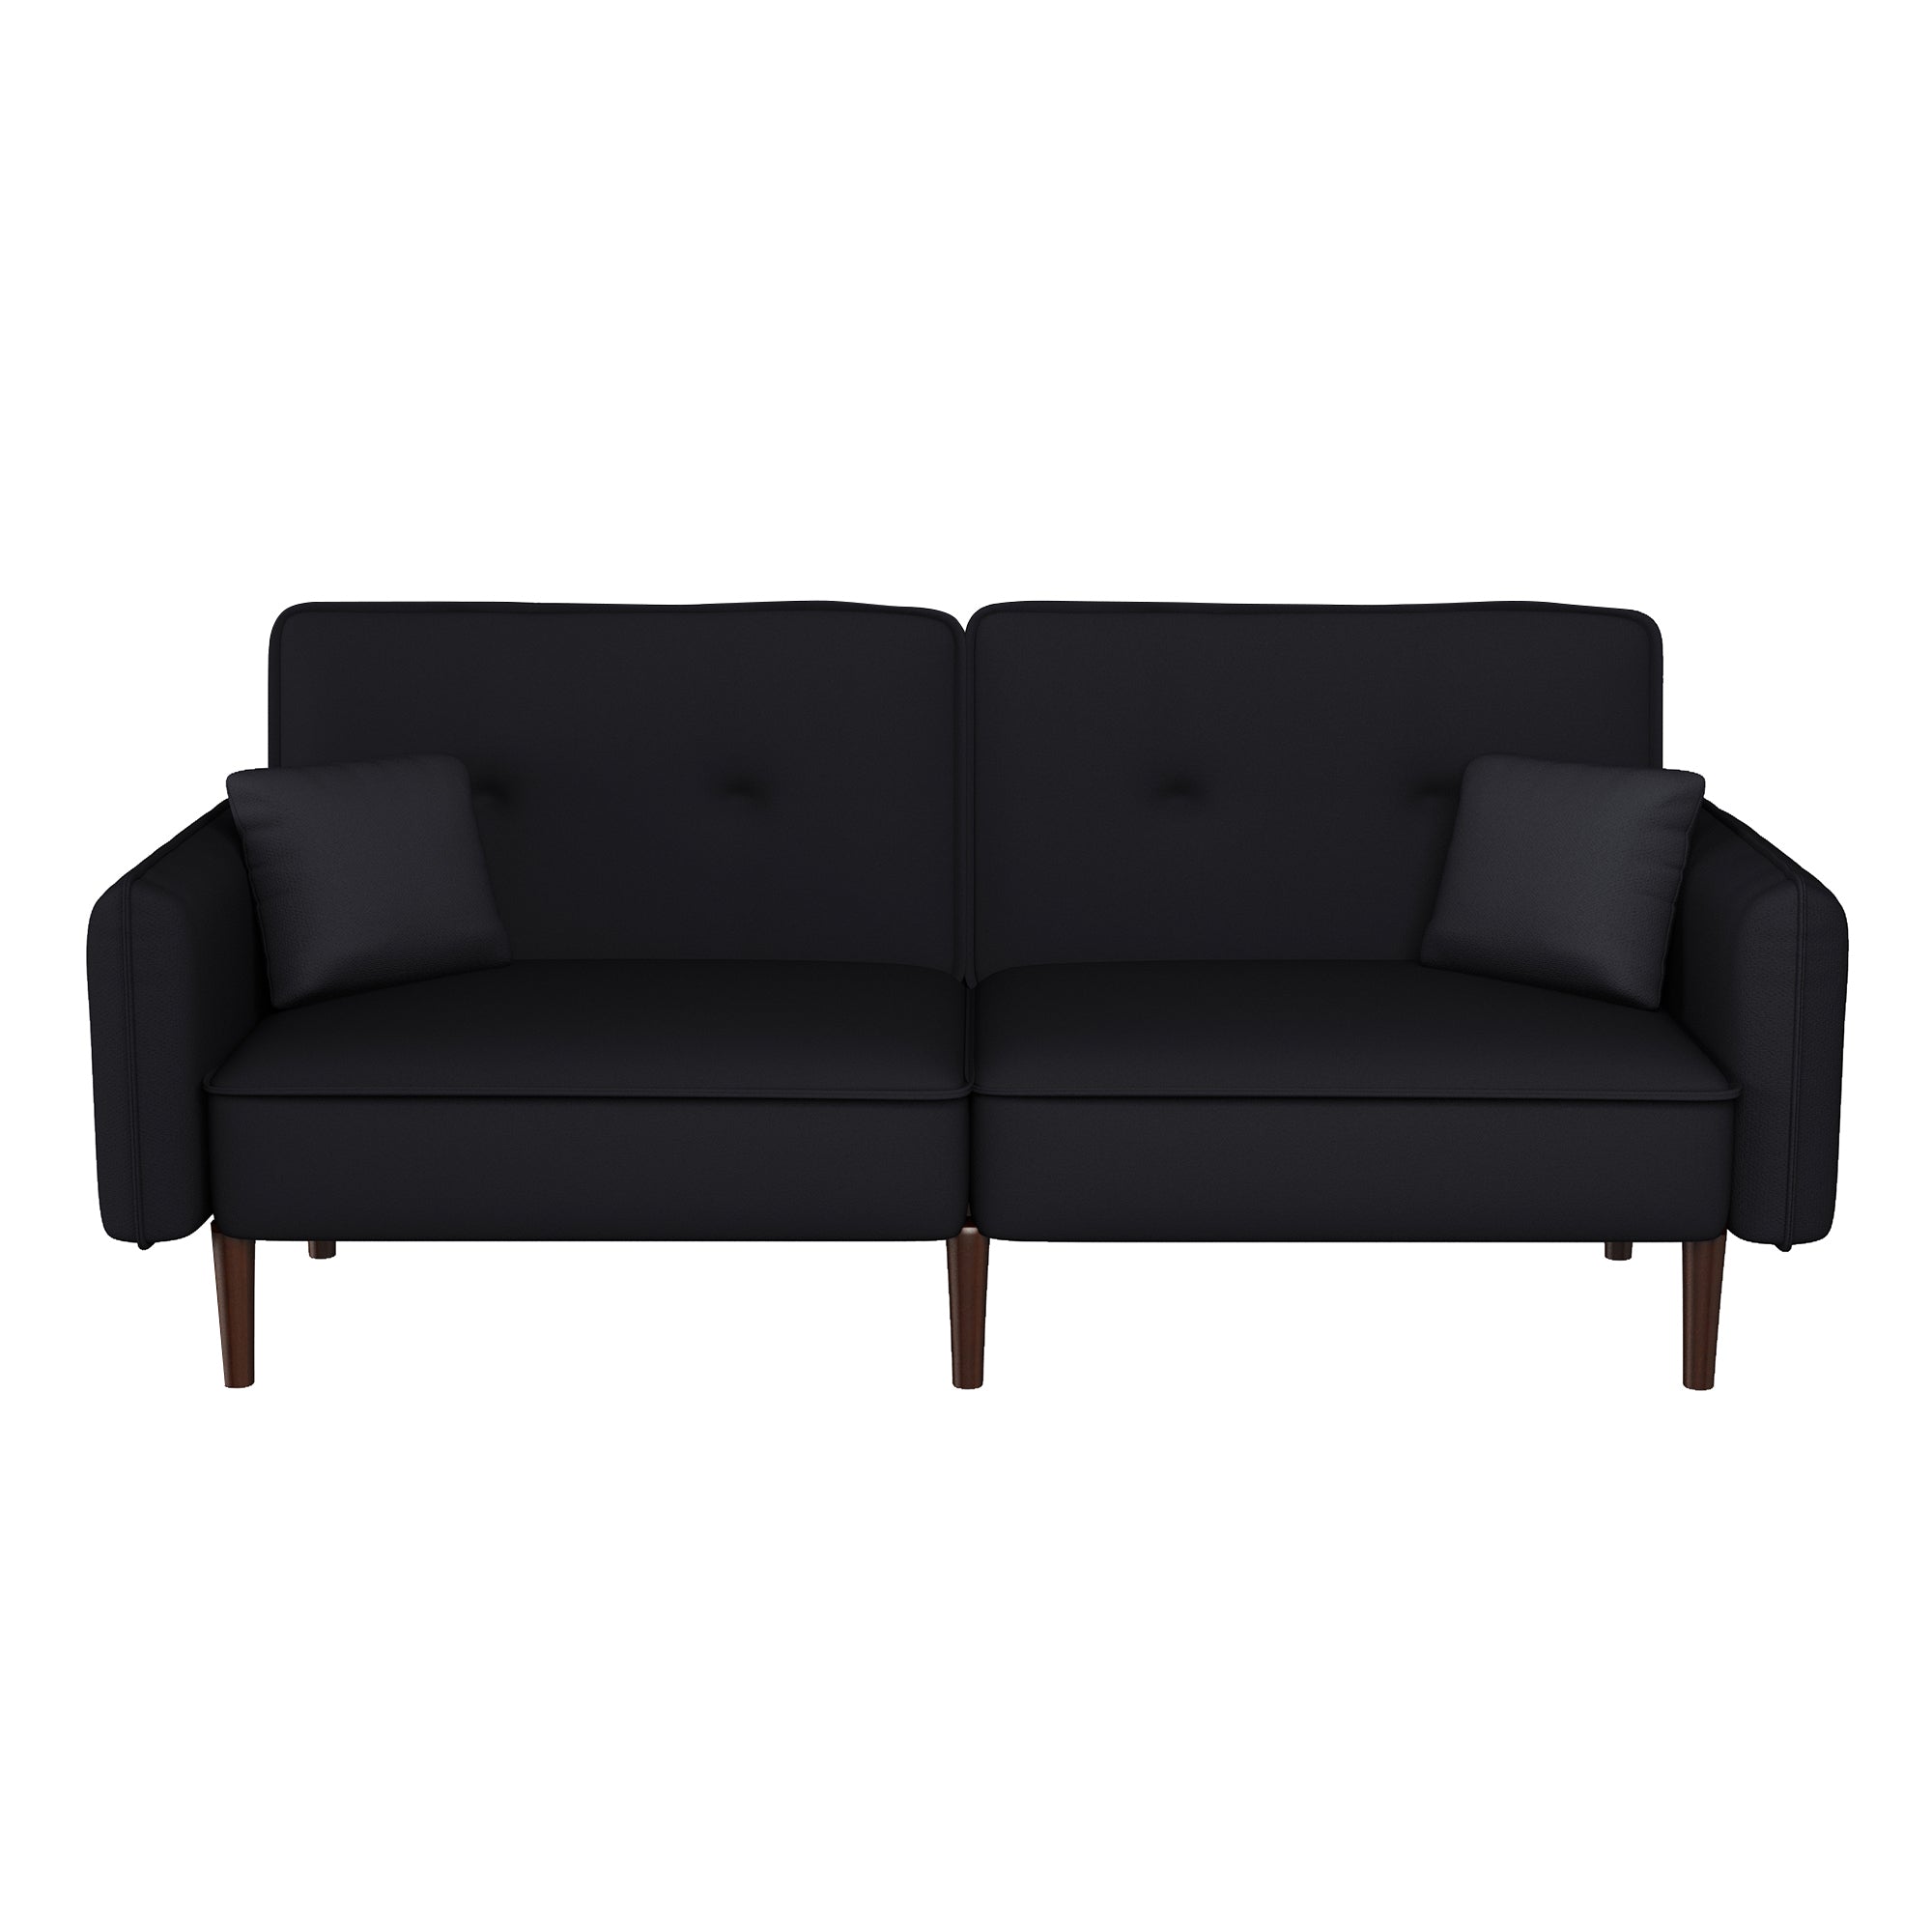 Convertible Sofa Bed with Wood Legs in Cotton Linen Fabric(Black)